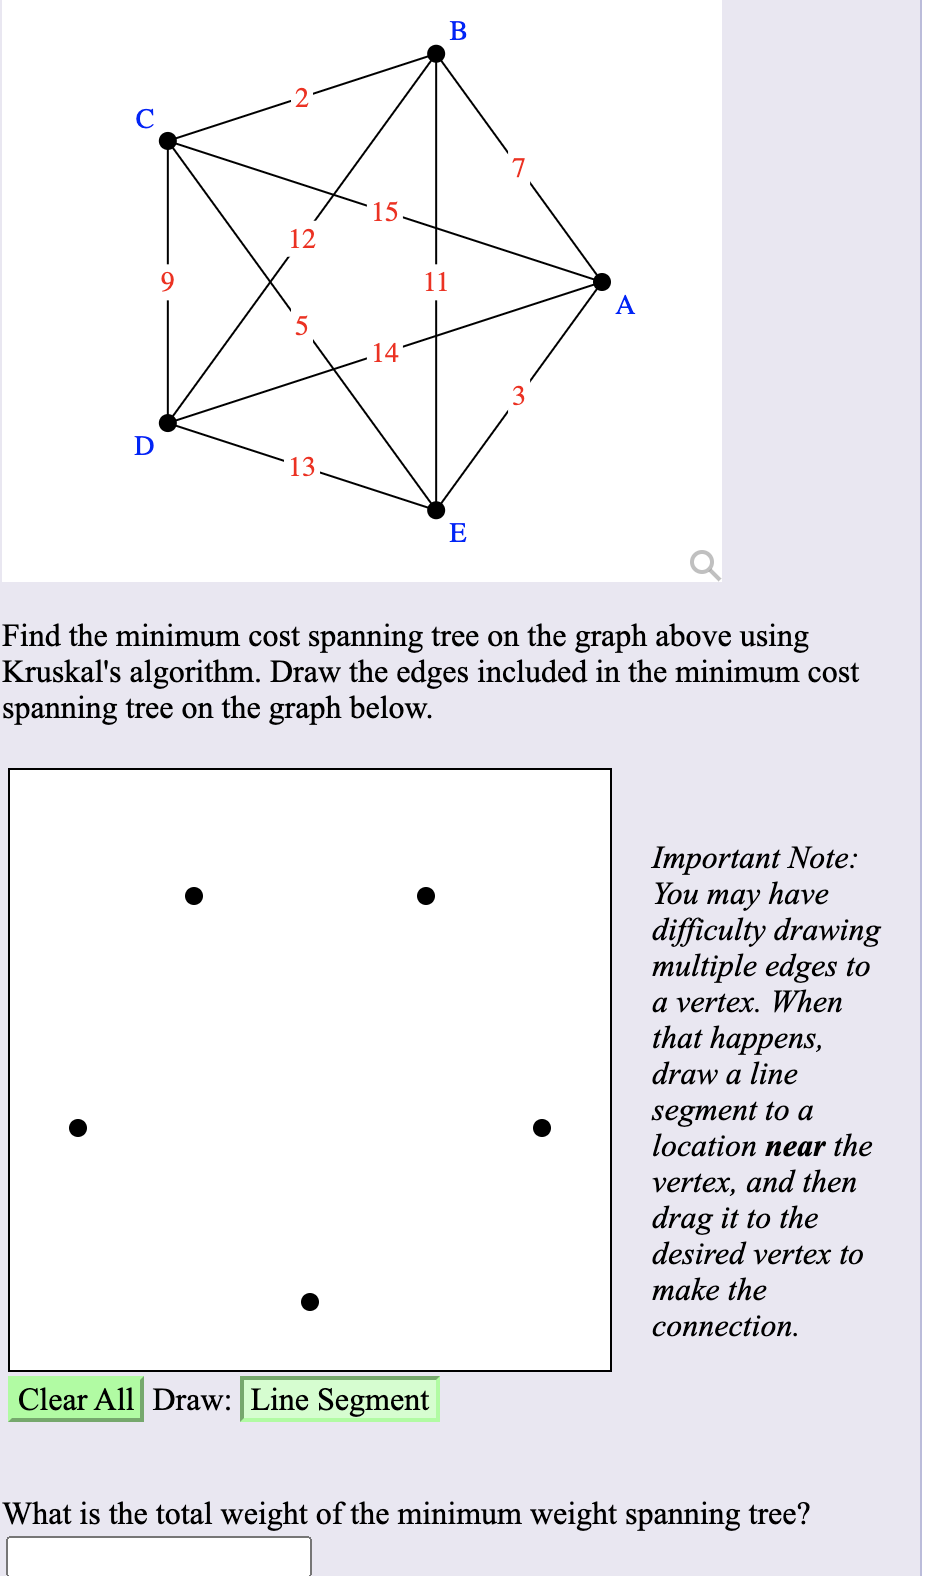 В
C
15
12
11
A
5
3
D
E
Find the minimum cost spanning tree on the graph above using
Kruskal's algorithm. Draw the edges included in the minimum cost
spanning tree on the graph below.
Important Note:
You may have
difficulty drawing
multiple edges to
a vertex. When
that happens,
draw a line
segment to a
location near the
vertex, and then
drag it to the
desired vertex to
make the
соппеction.
Clear All Draw: Line Segment
What is the total weight of the minimum weight spanning tree?
